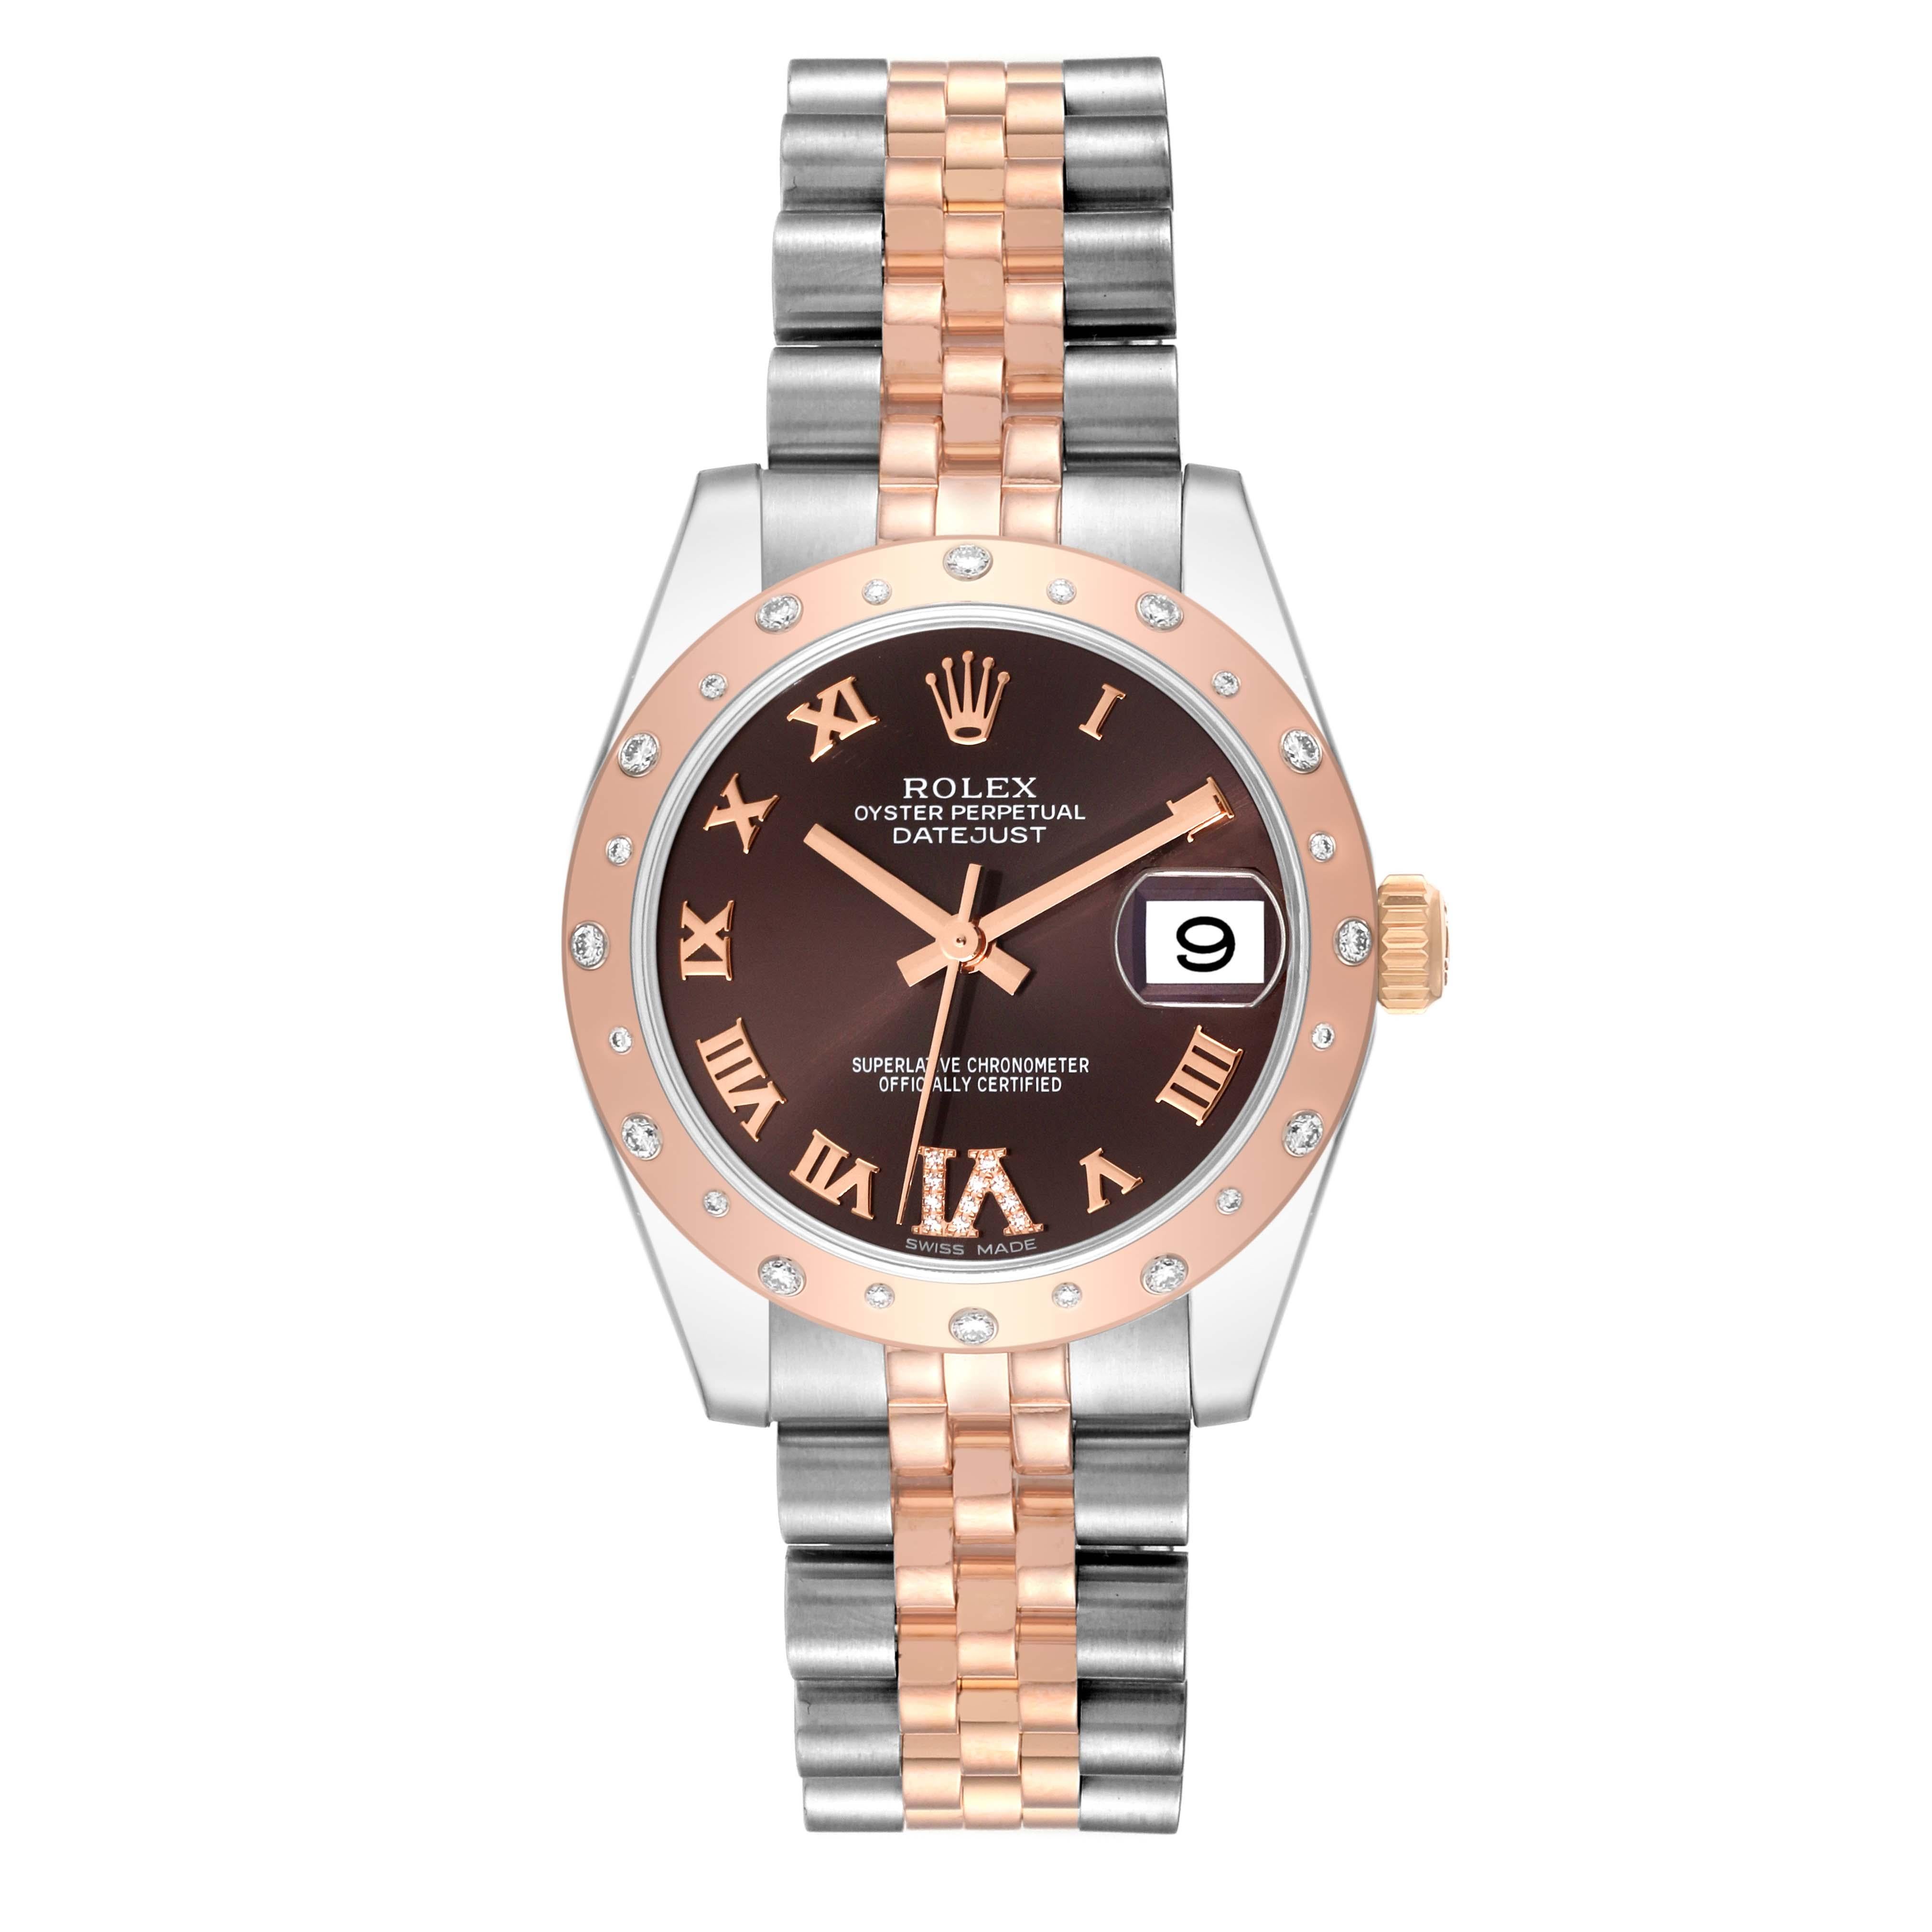 Rolex Datejust 31 Midsize Steel Everose Gold Chocolate Dial Diamond Watch 178341. Officially certified chronometer self-winding movement with quickset date function. Stainless steel and 18K rose gold oyster case 31 mm in diameter. Rolex logo on a